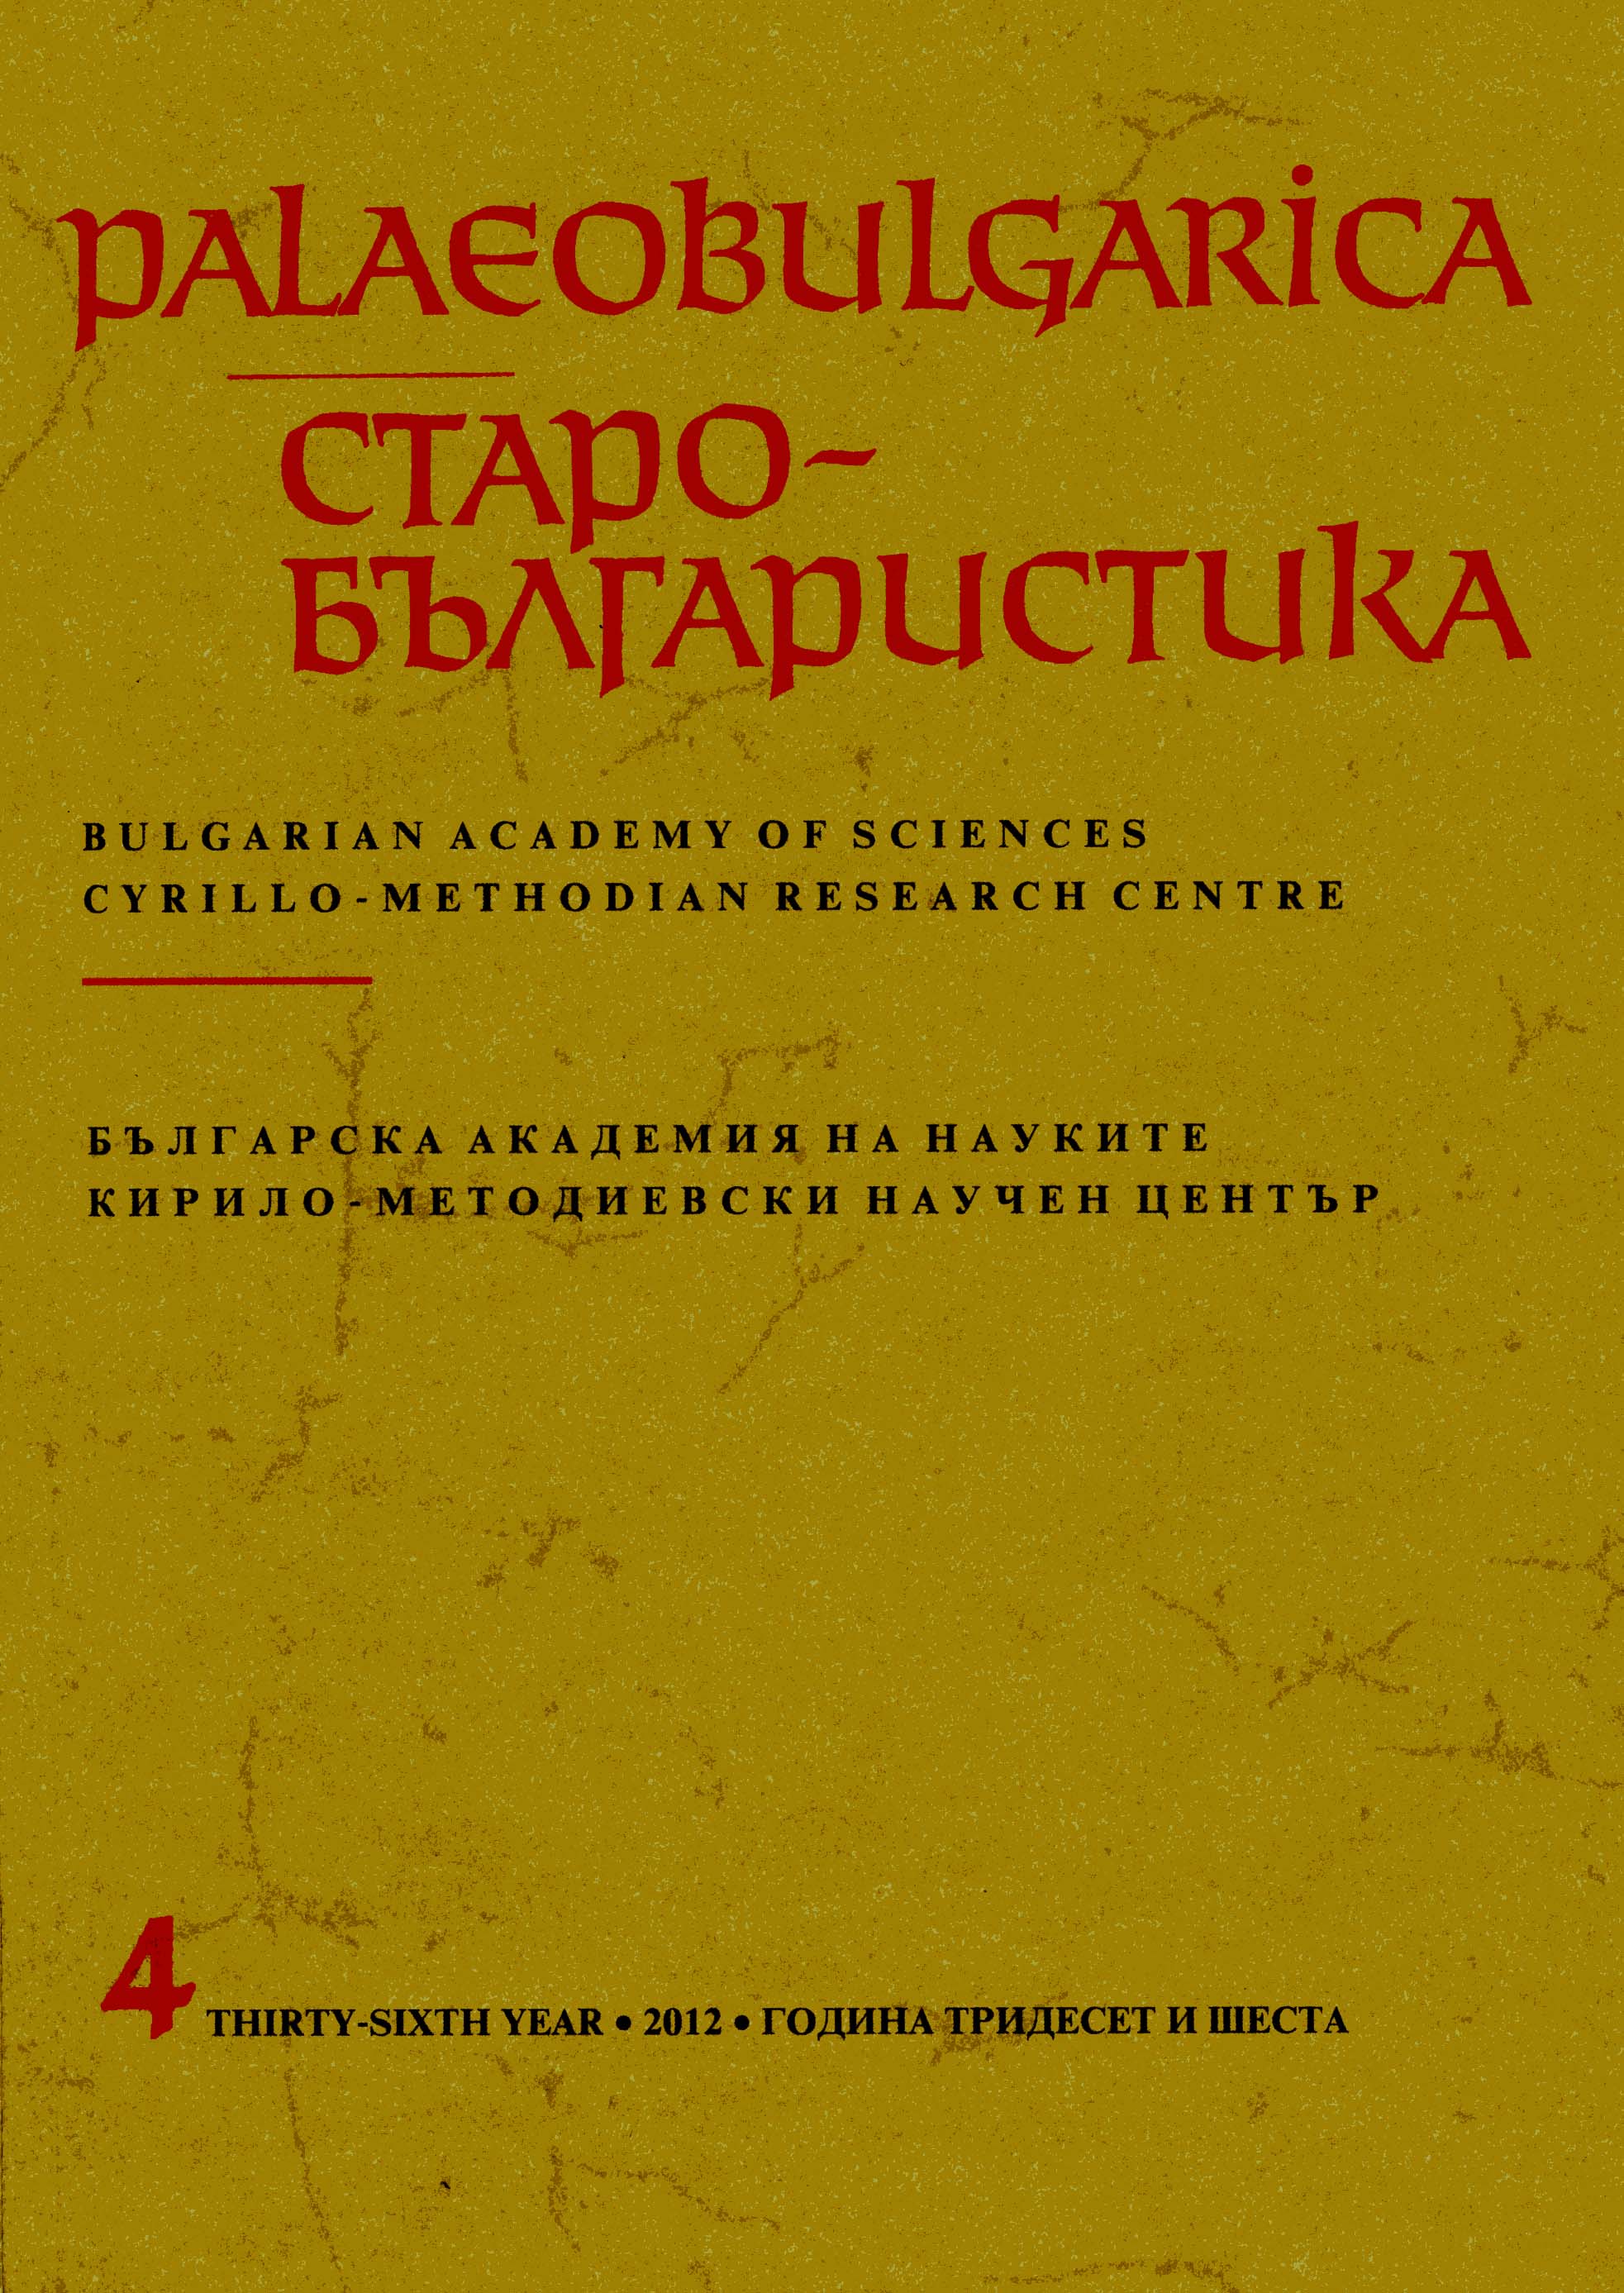 The Hilandar Research Library and Bulgaria: 40 Years of Cooperation Cover Image